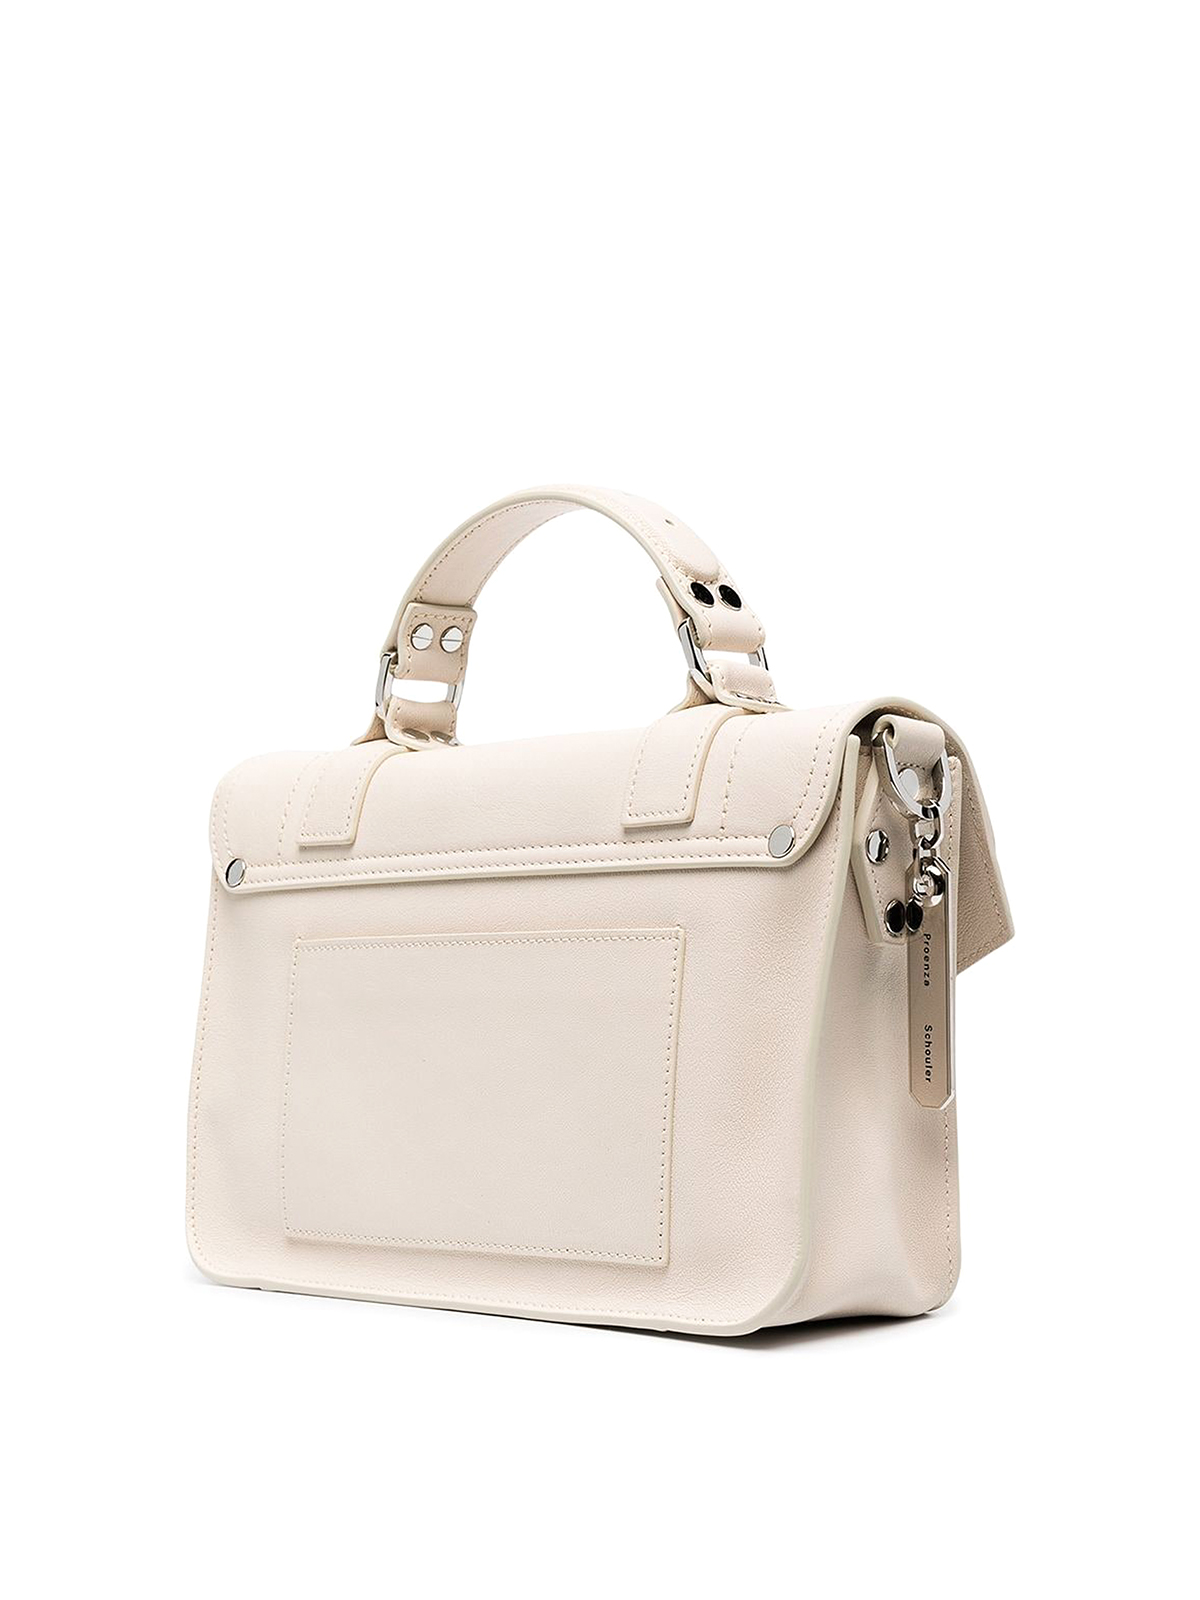 Shop Proenza Schouler Leather Flap Front Bag With Metal Tab Closure In White